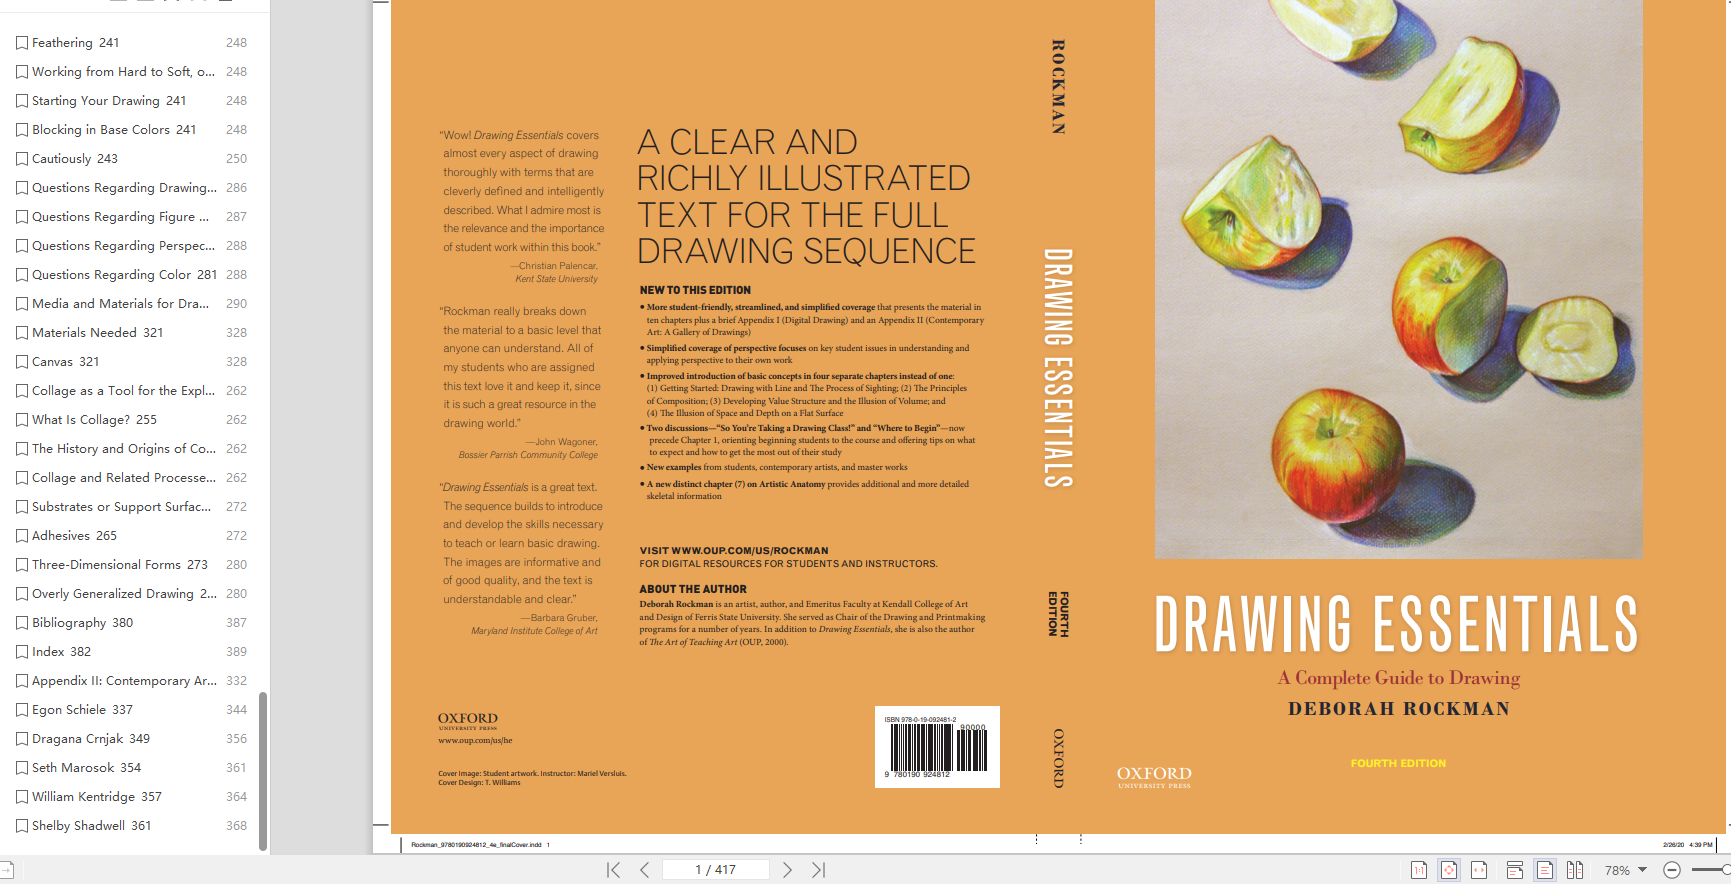 Drawing Essentials A Complete Guide to Drawing 4th by Deborah Rockman